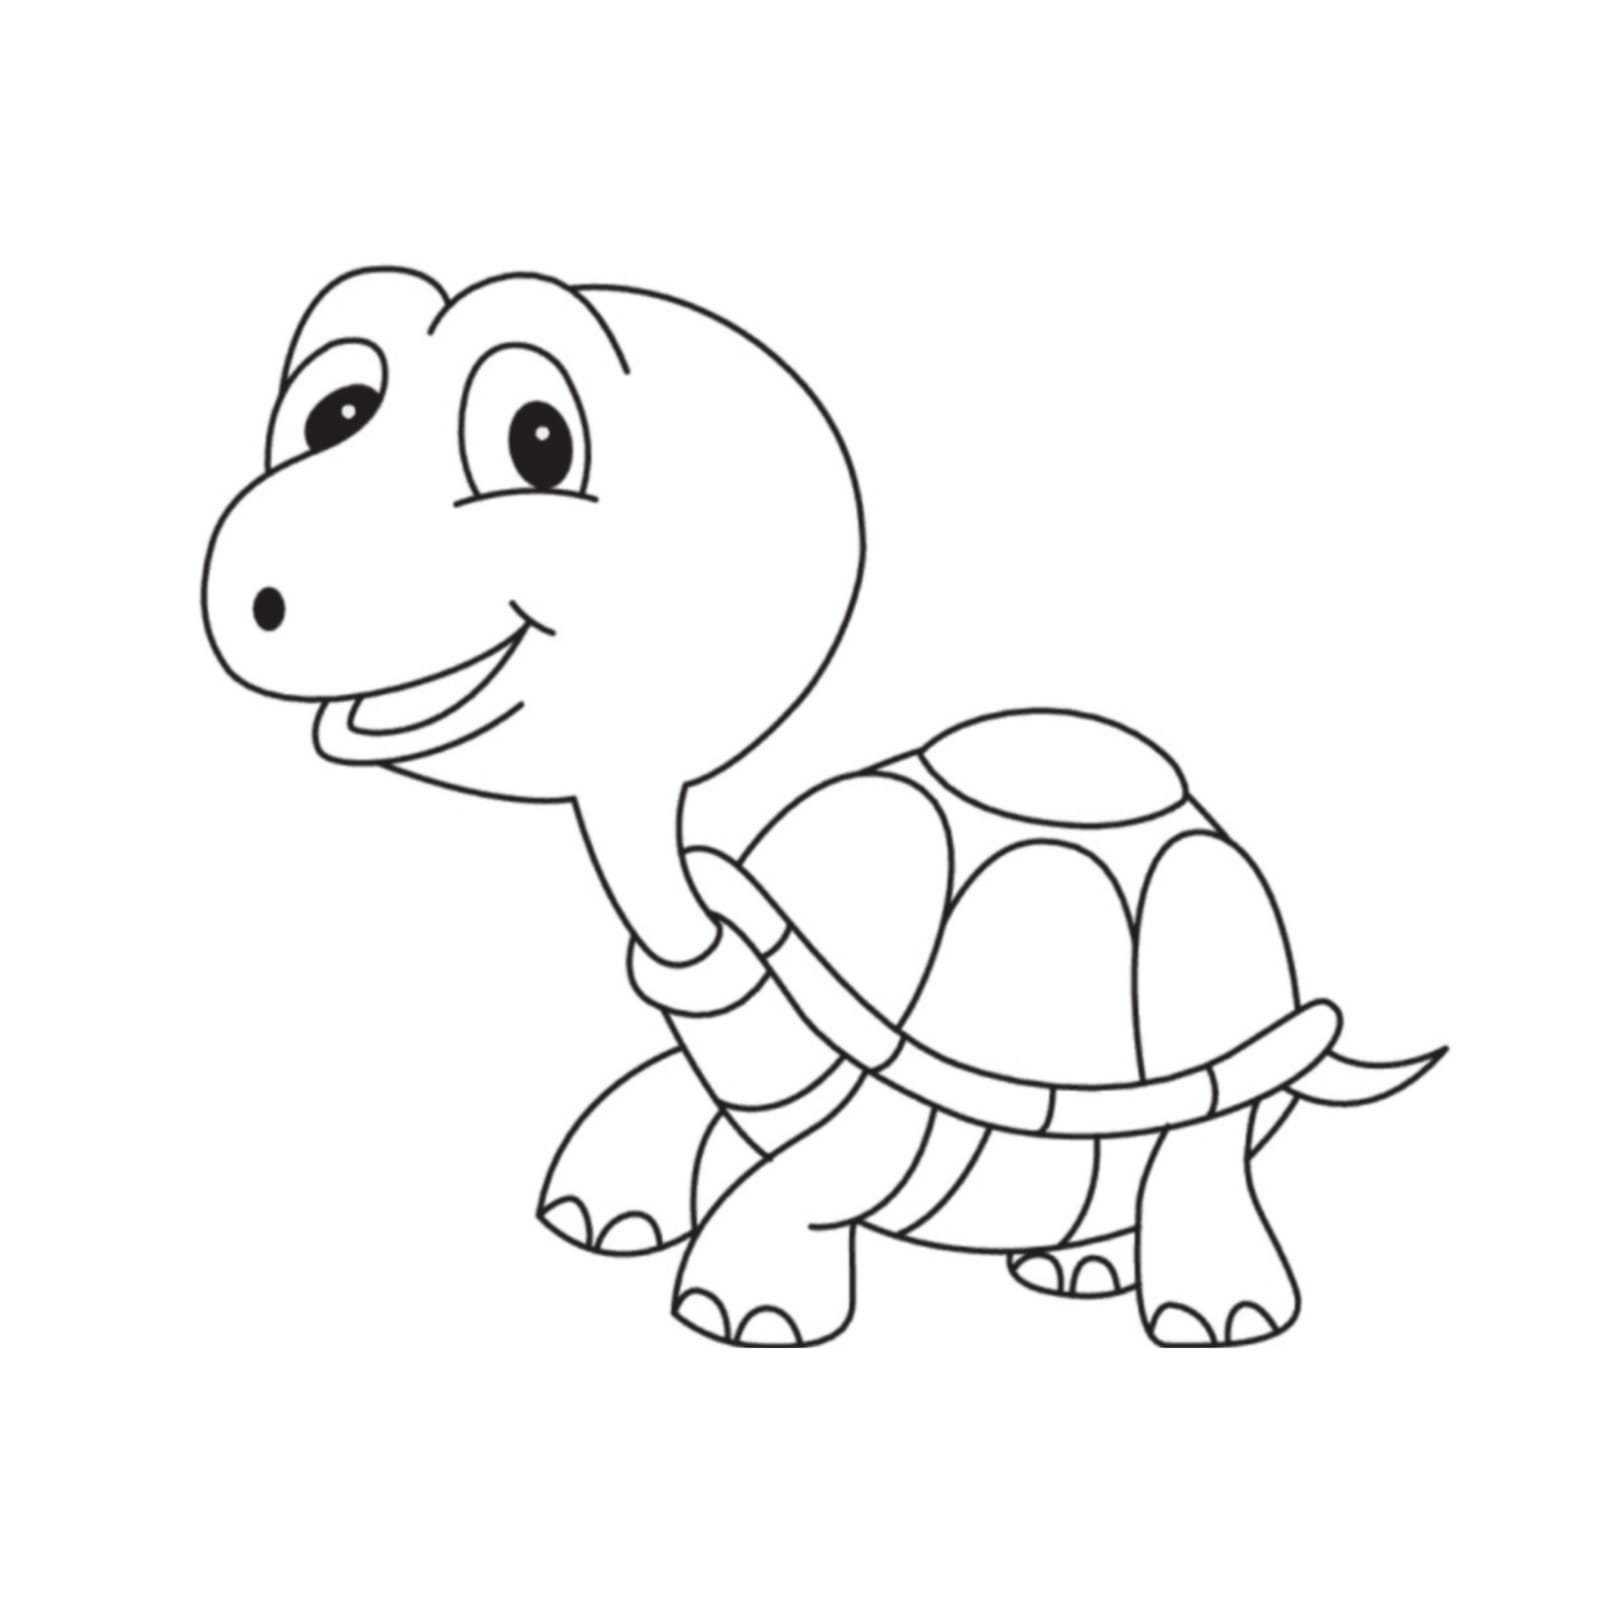 turtle drawing images & draw step by step